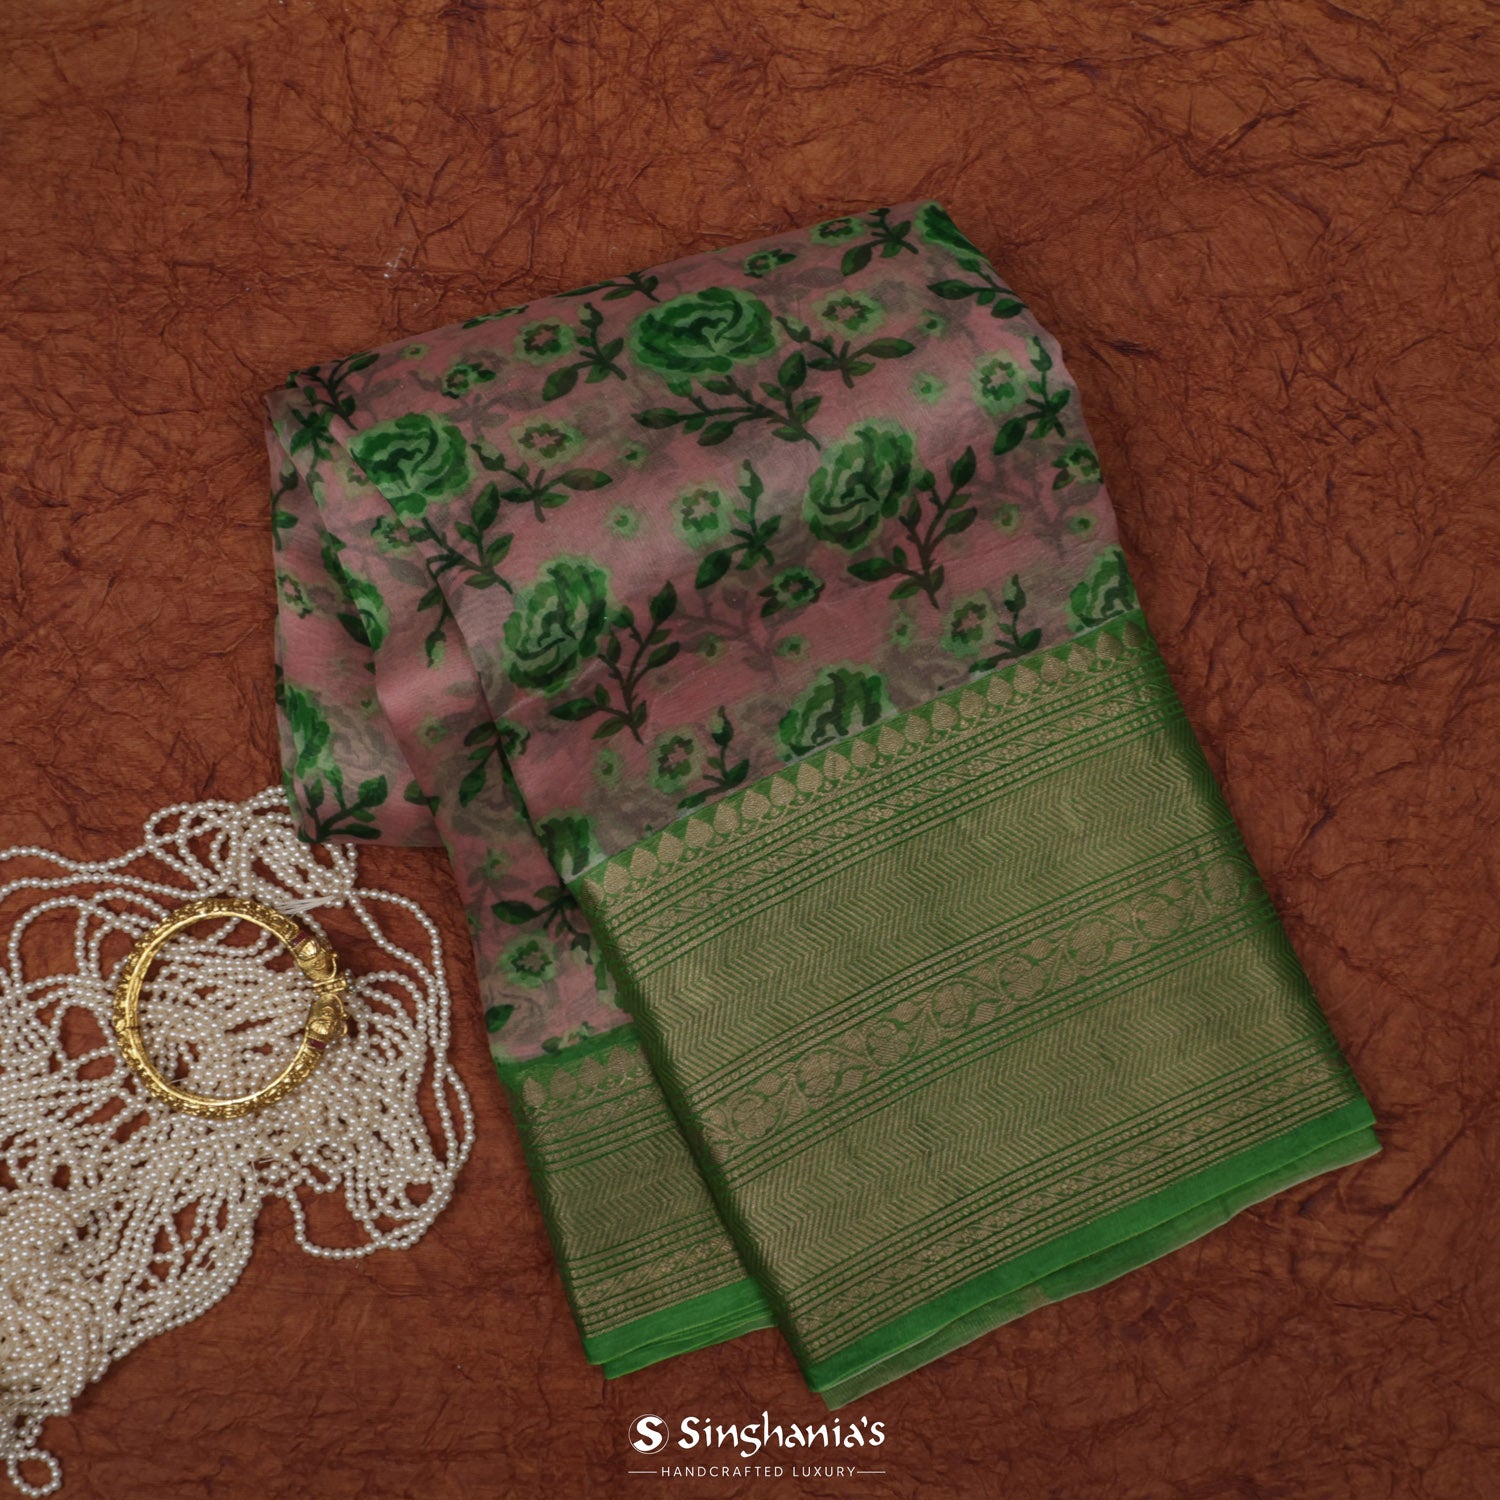 Silvery Pink Printed Organza Saree With Floral Pattern